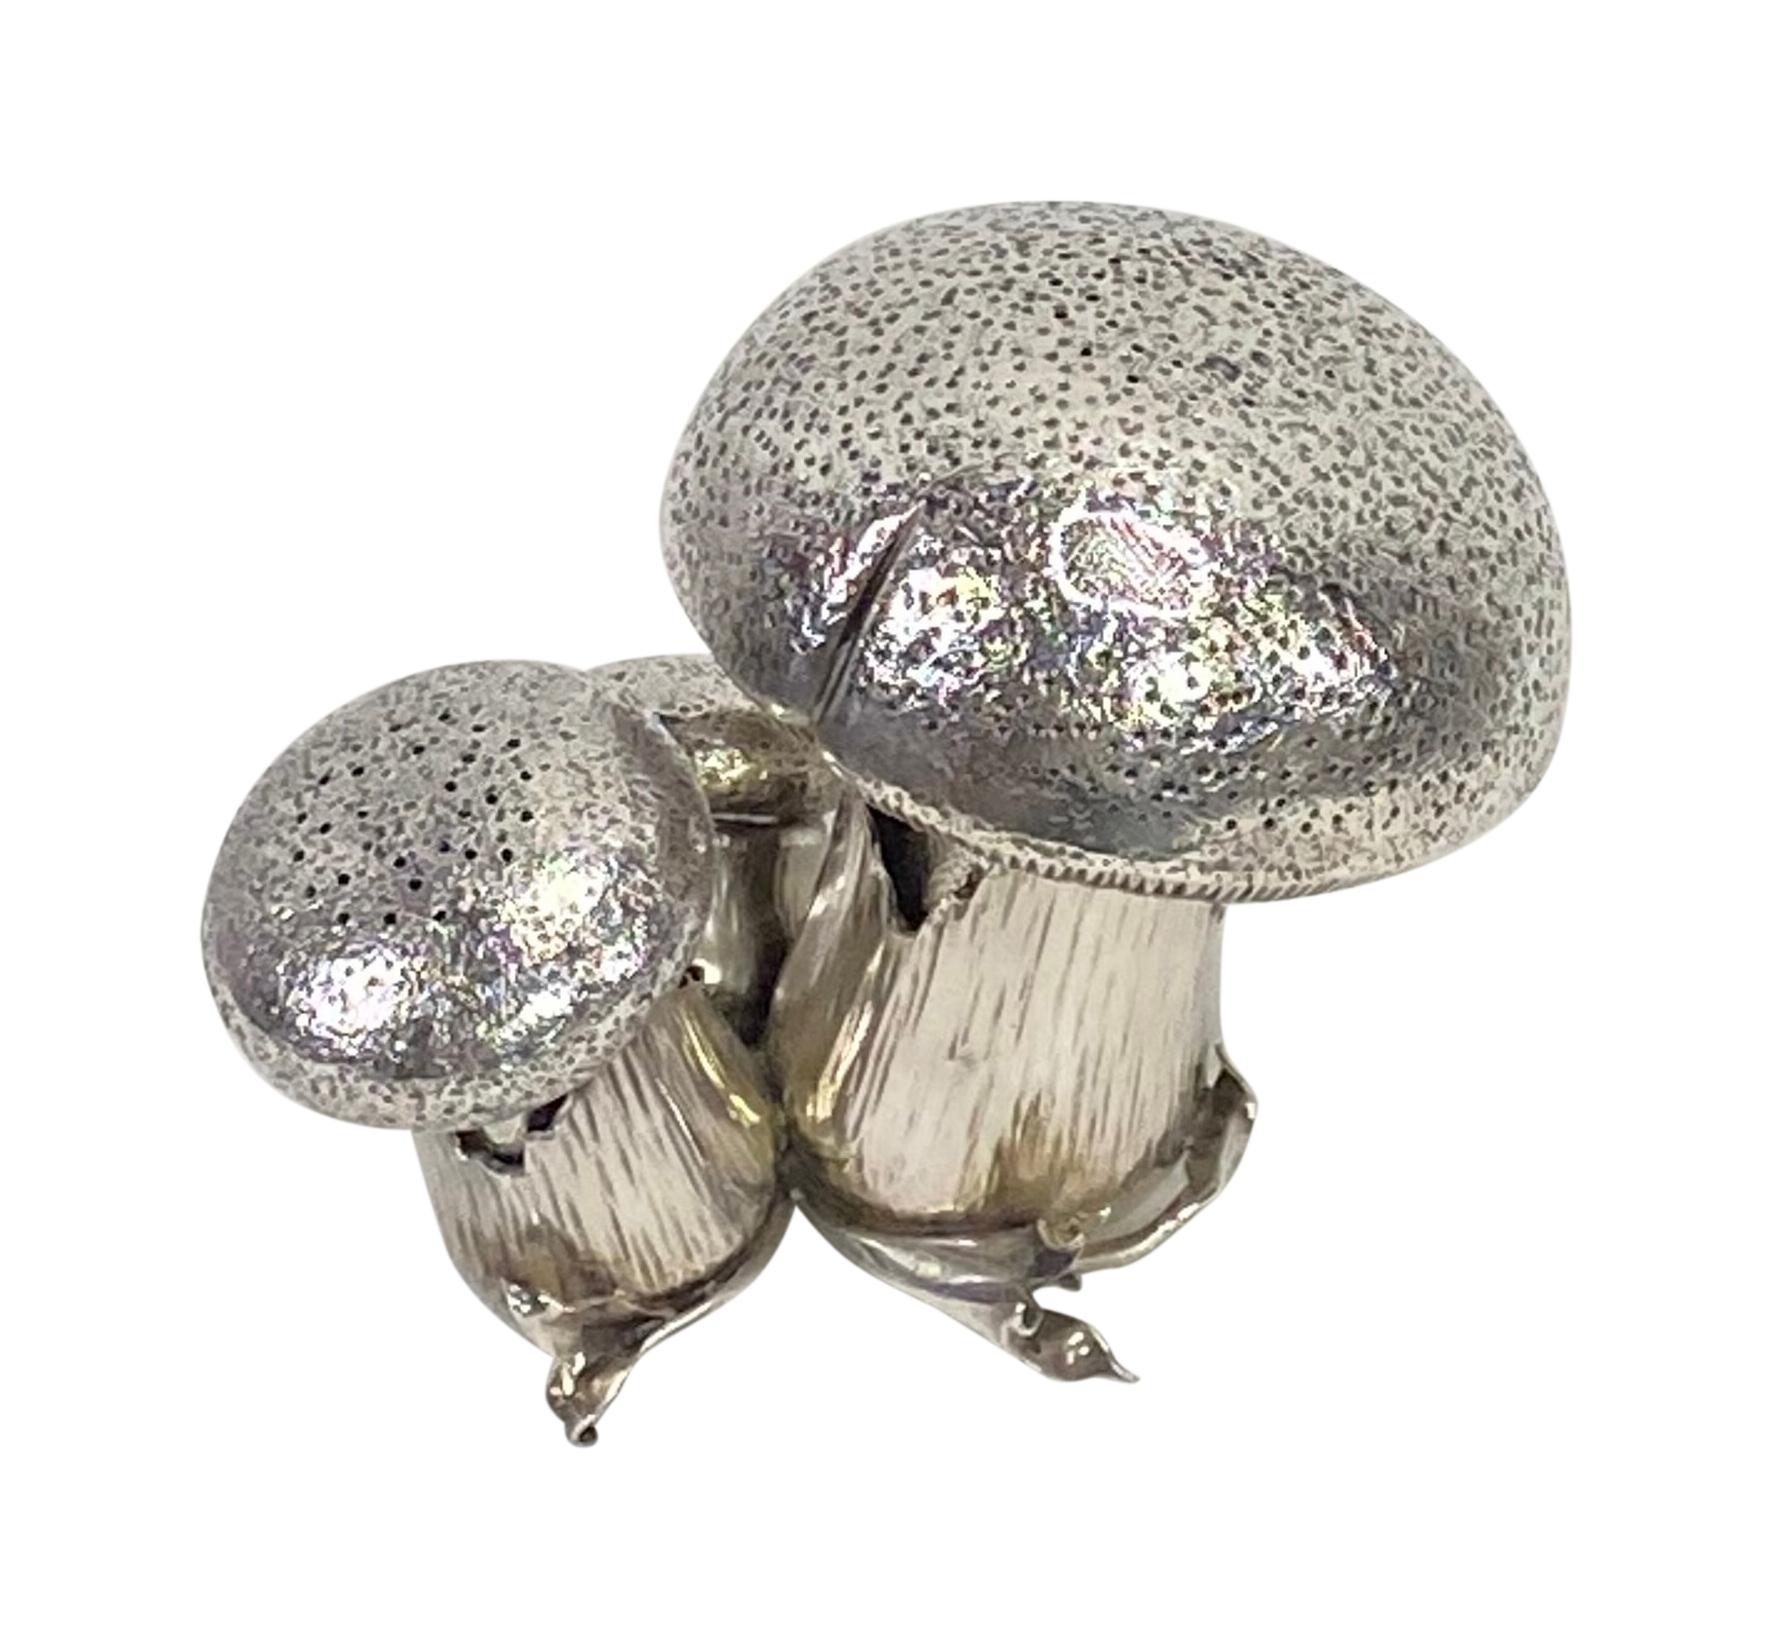 Hand-Crafted Italian Sterling Silver Mushroom Salt & Pepper Shaker Signed by Buccellati